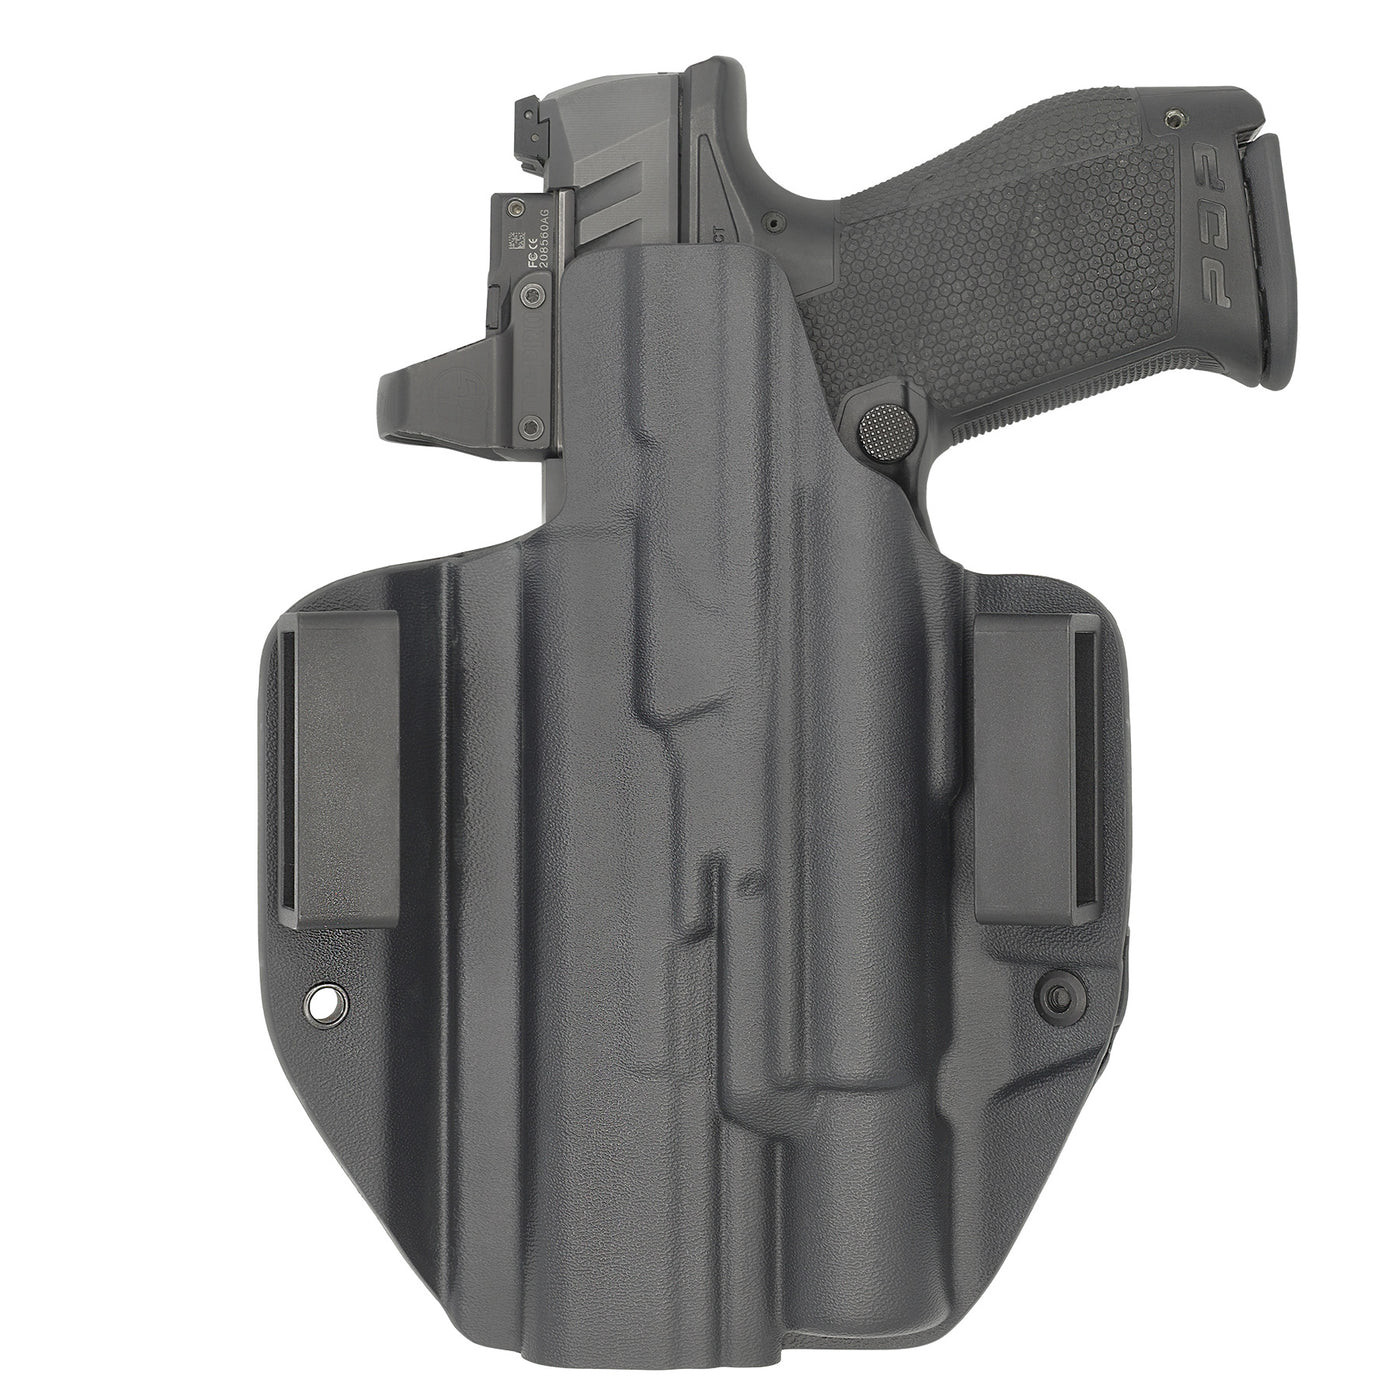 C&G Holsters custom OWB Tactical H&K VP9 Surefire X300 in holstered position back view